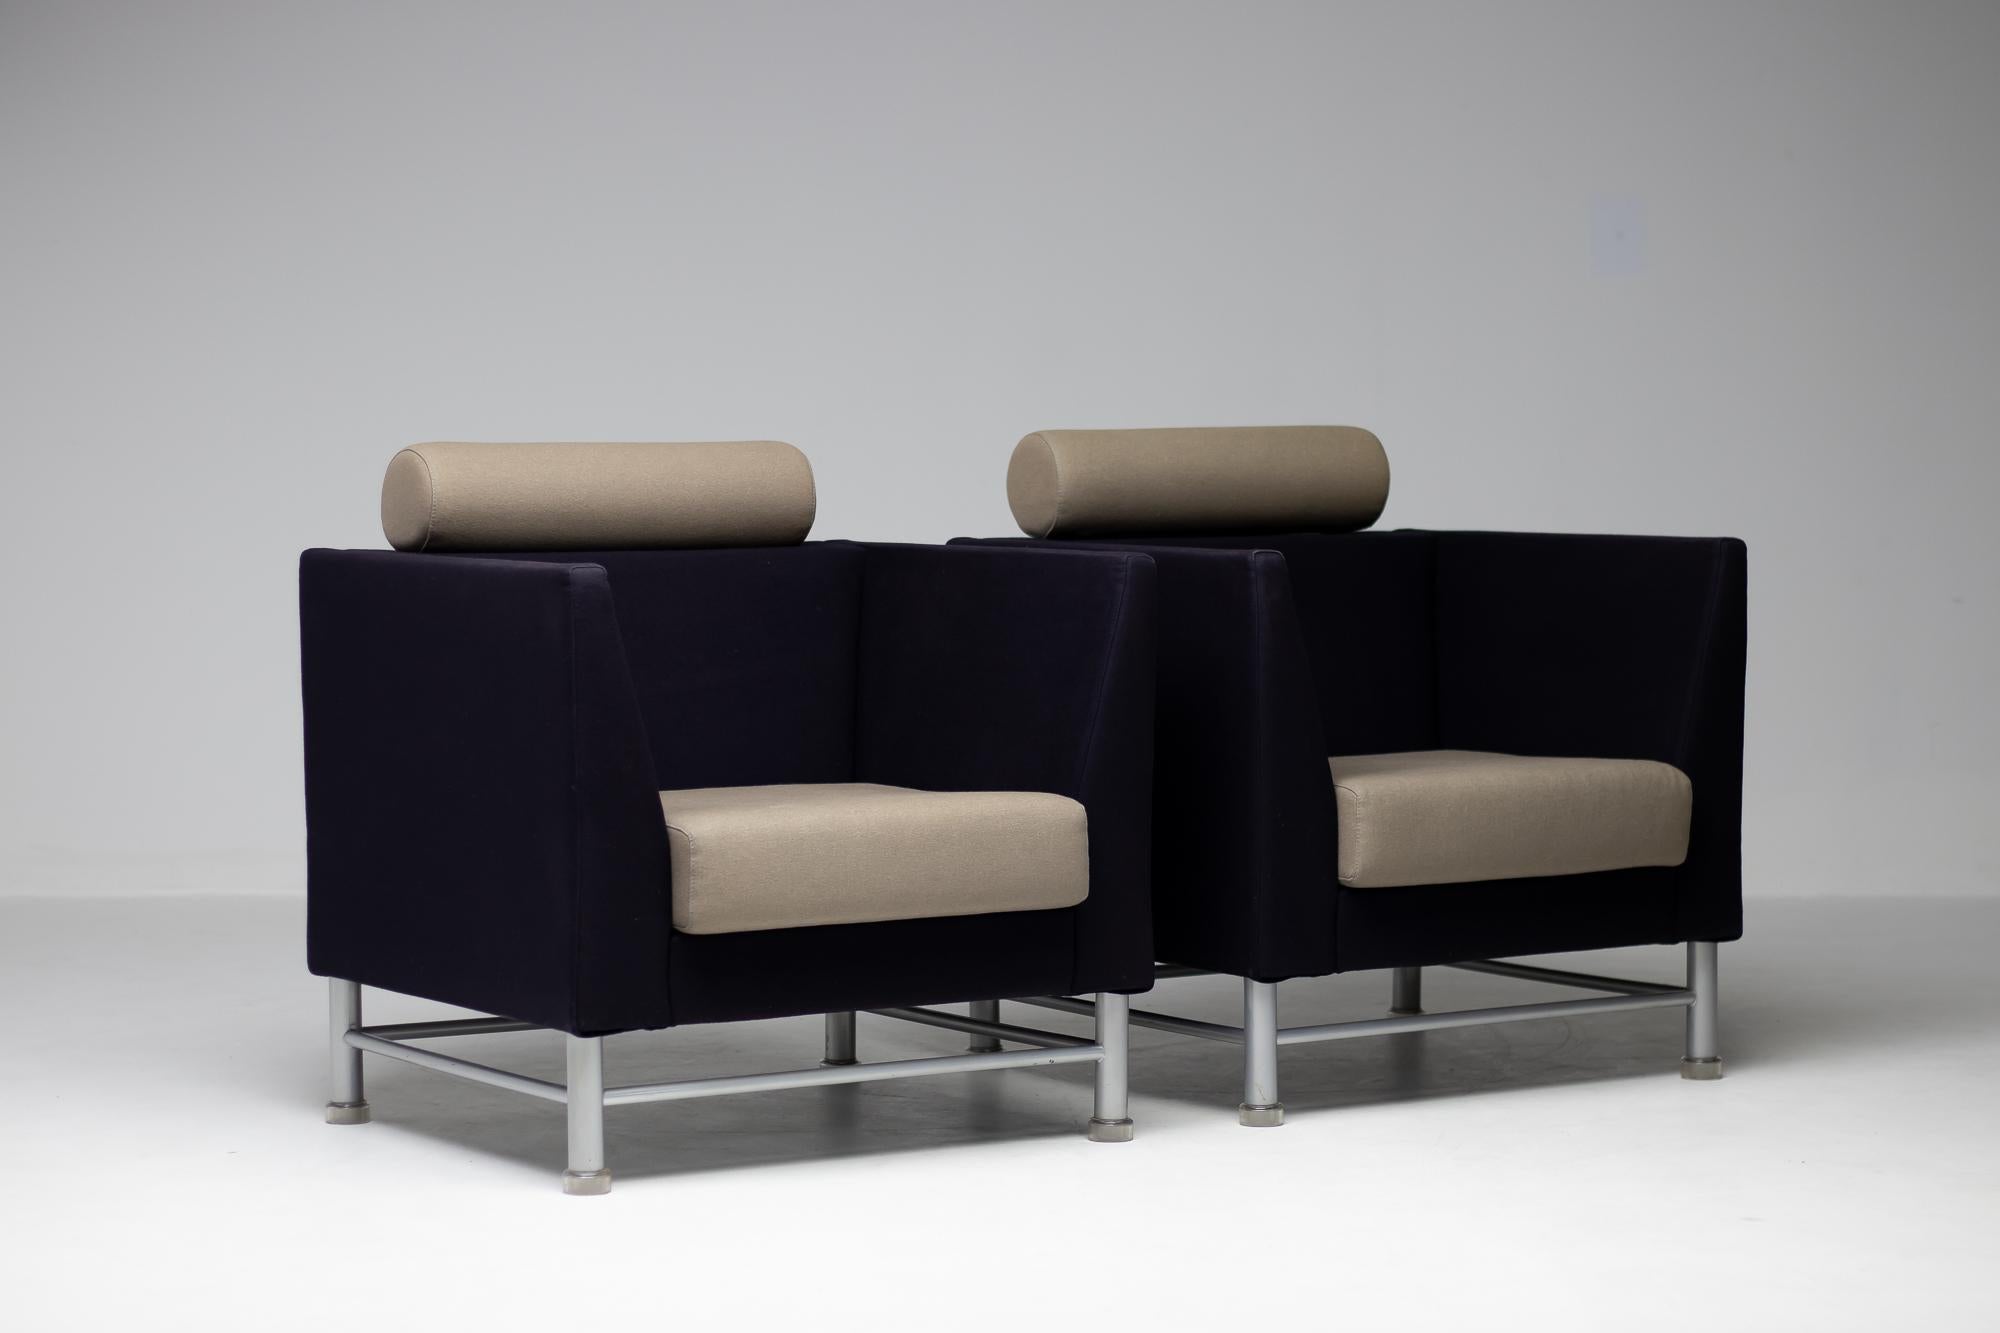 East side lounge chairs designed by Ettore Sottsass for Knoll International in 1983.
Postmodern chairs with original upholstery in nice vintage condition.
The chairs features a gray enameled steel base with translucent plastic feet.
The pair will